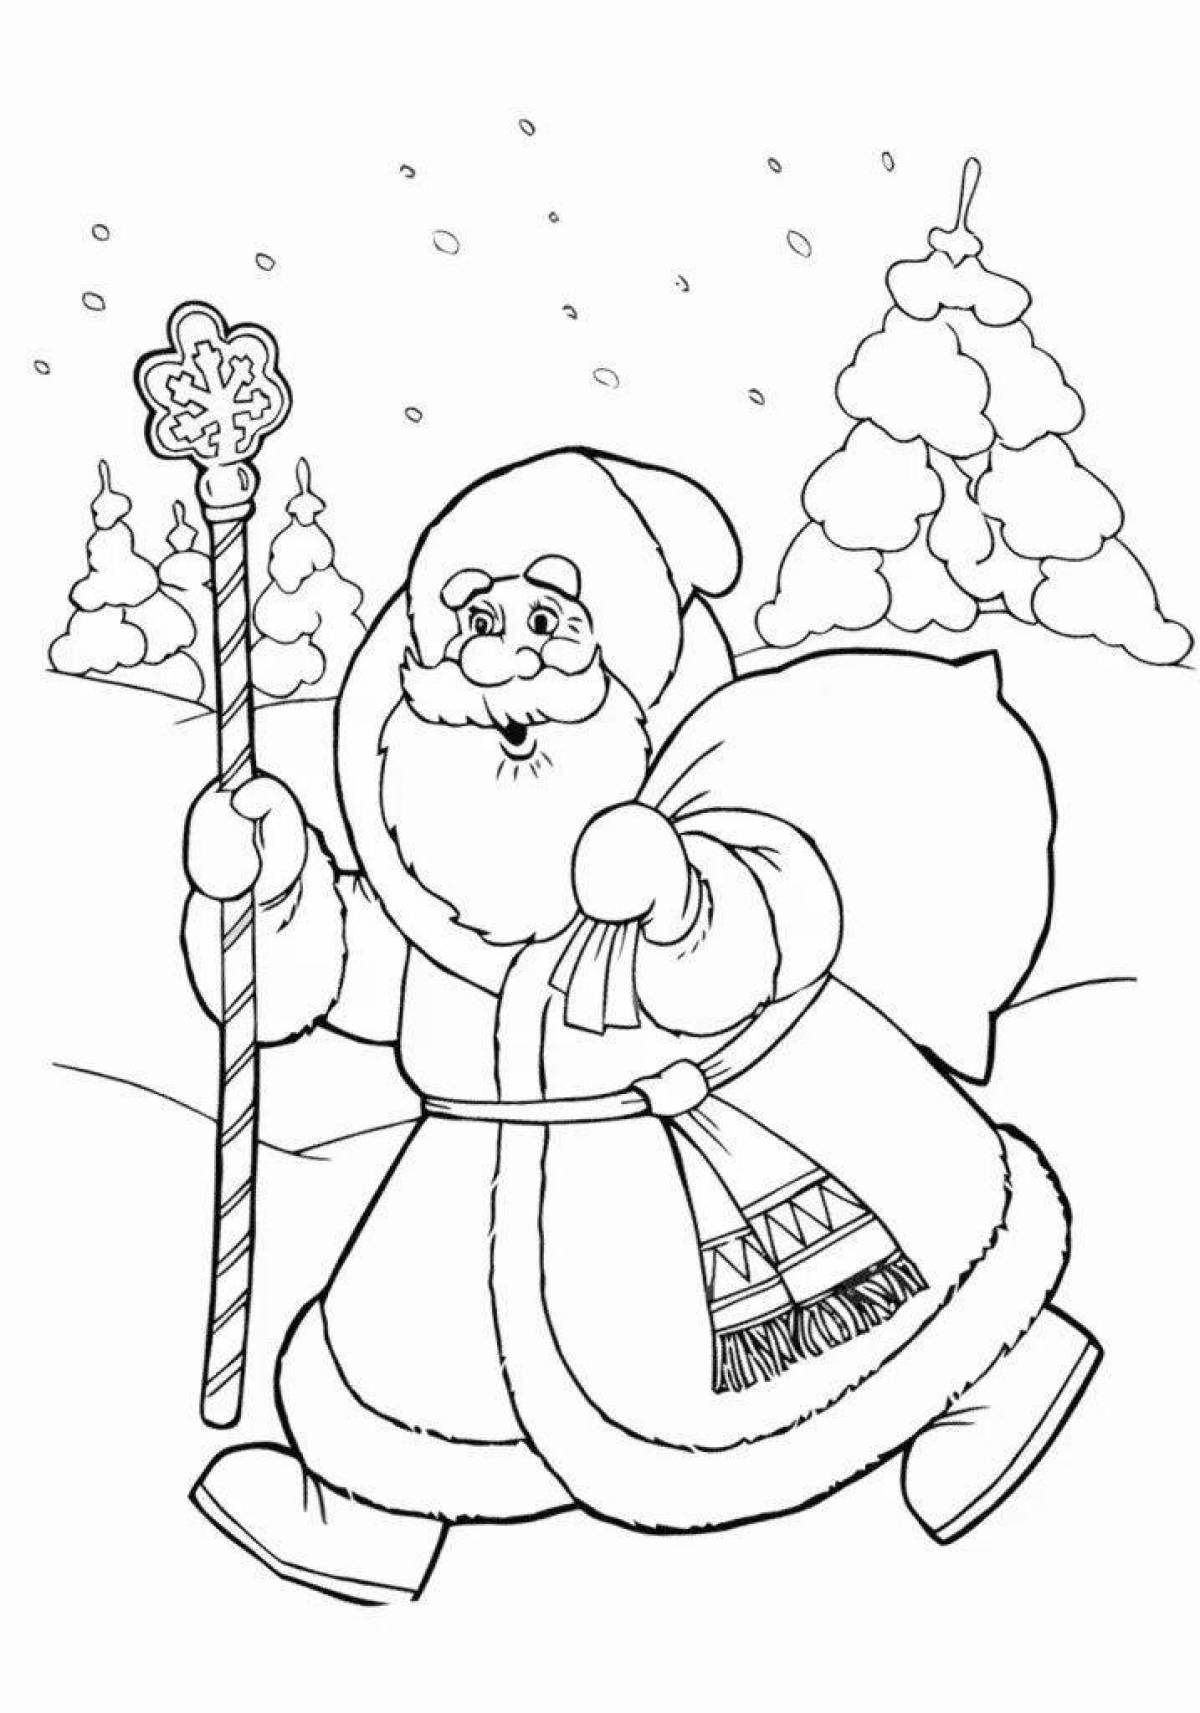 Charming coloring frost Ivanovich Grade 3